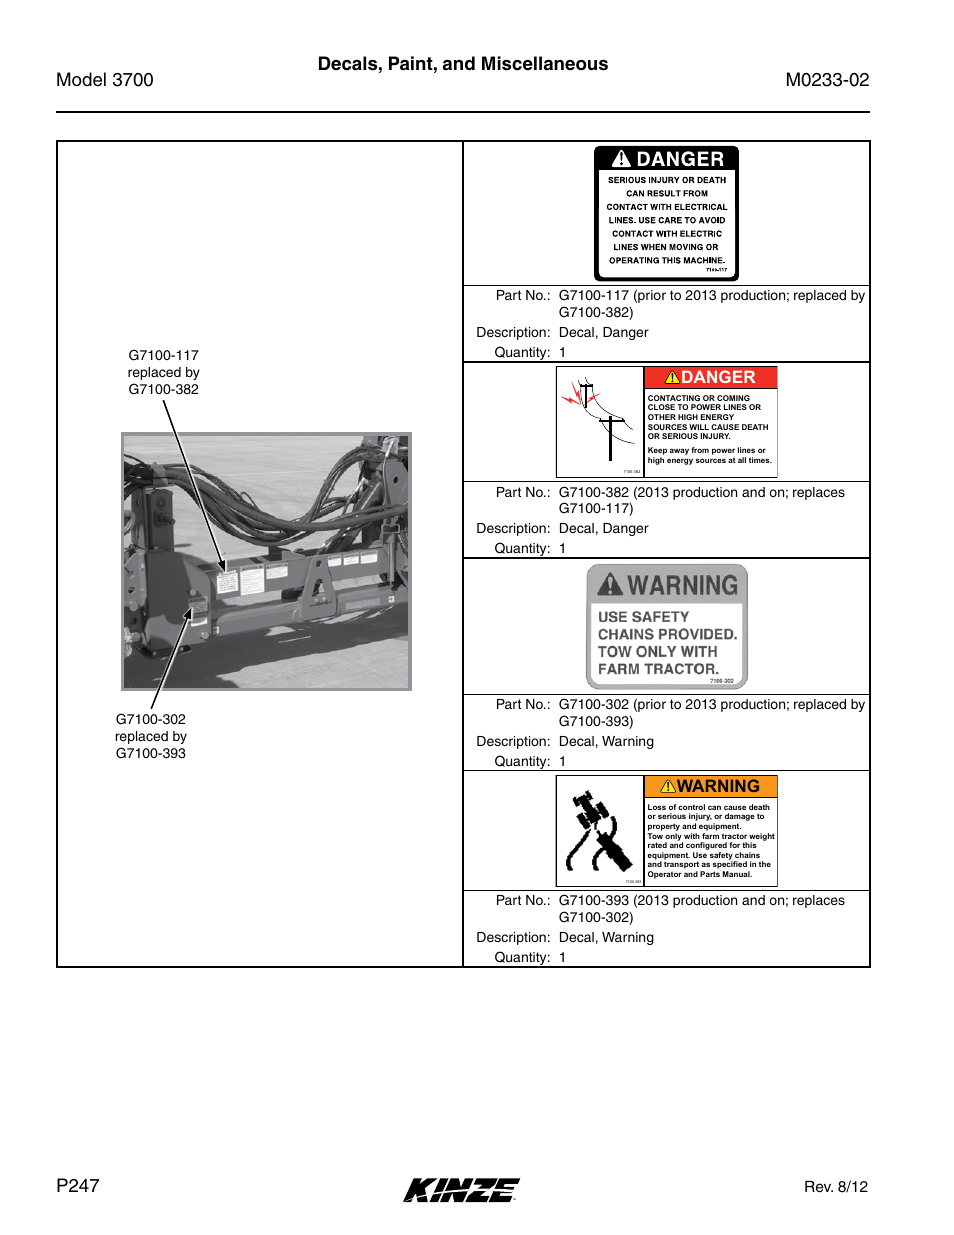 Decals, paint, and miscellaneous, Danger, Warning | Kinze 3700 Front Folding Planter Rev. 6/14 User Manual | Page 250 / 284